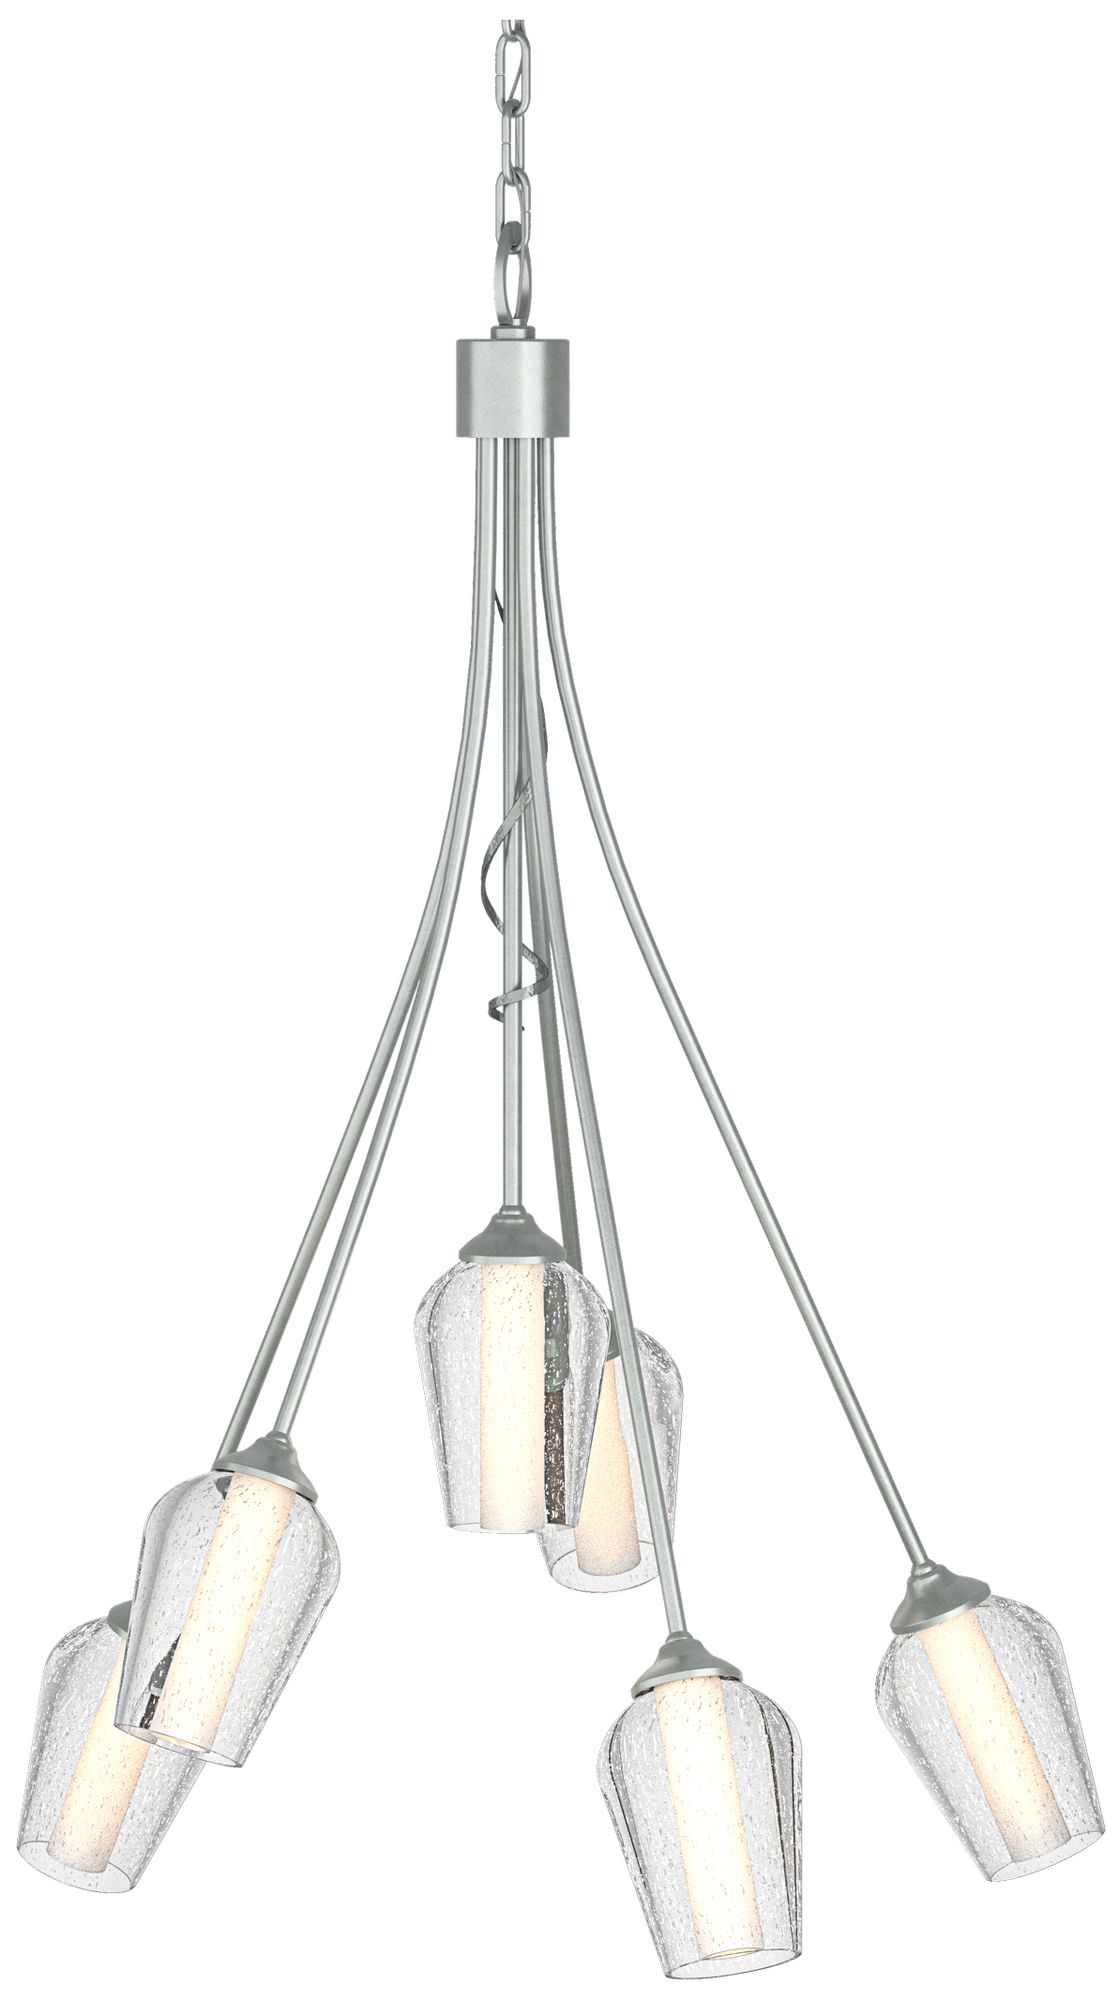 Flora 23.1"W 6 Arm Vintage Platinum Chandelier With Opal and Seeded Gl